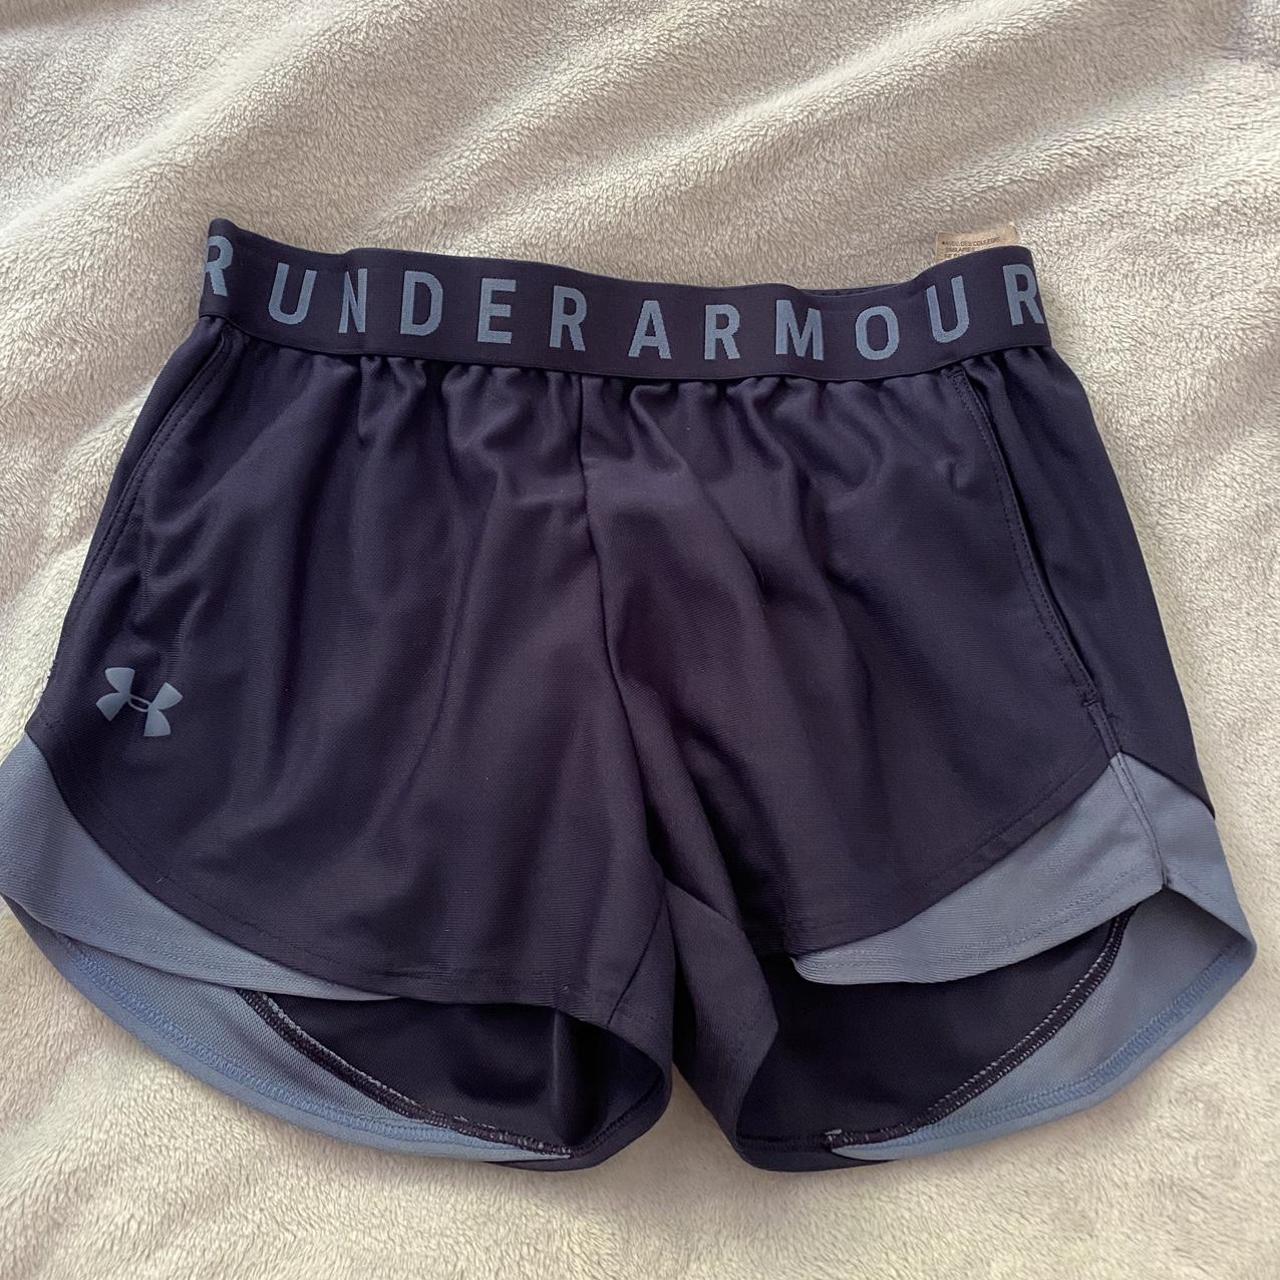 under armor womens shorts xs , barely used but i took